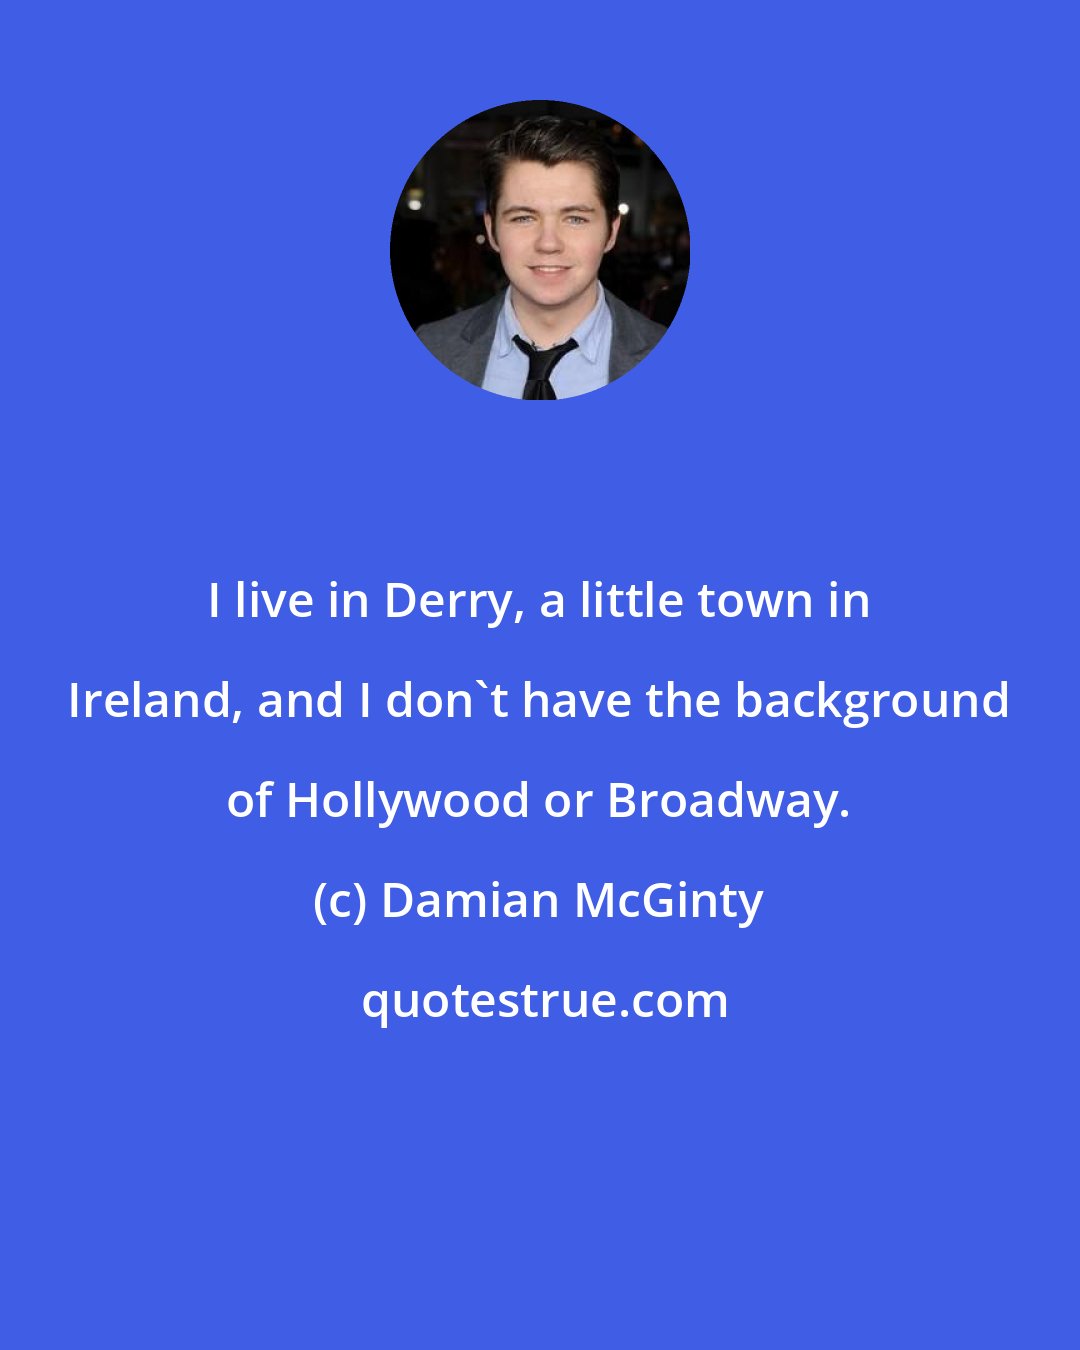 Damian McGinty: I live in Derry, a little town in Ireland, and I don't have the background of Hollywood or Broadway.